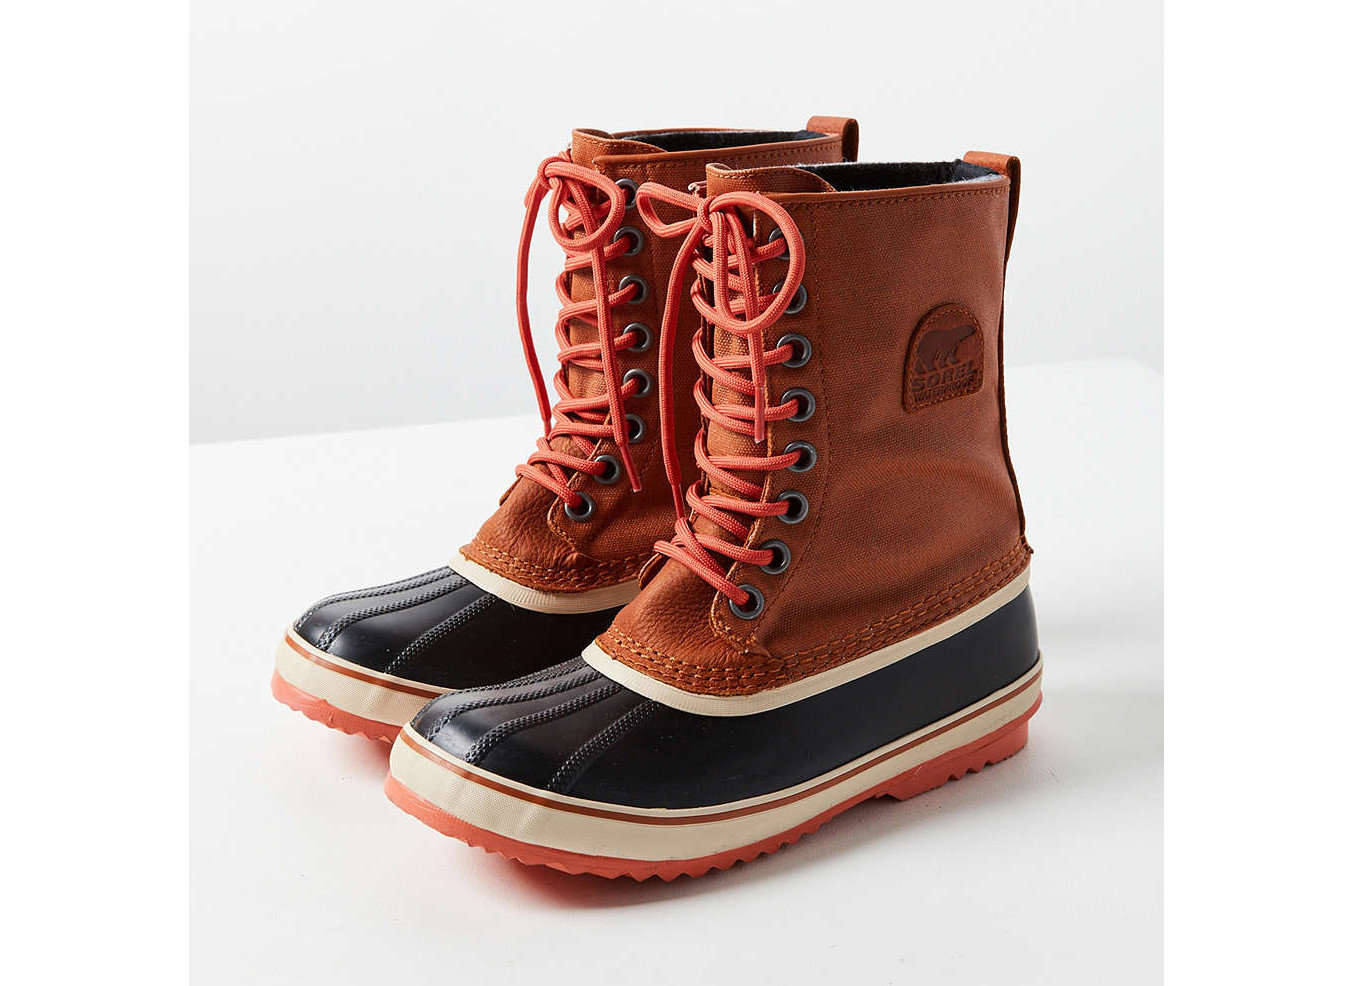 Travel Shop Travel Tips footwear clothing boot shoe brown product snow boot shoes product design